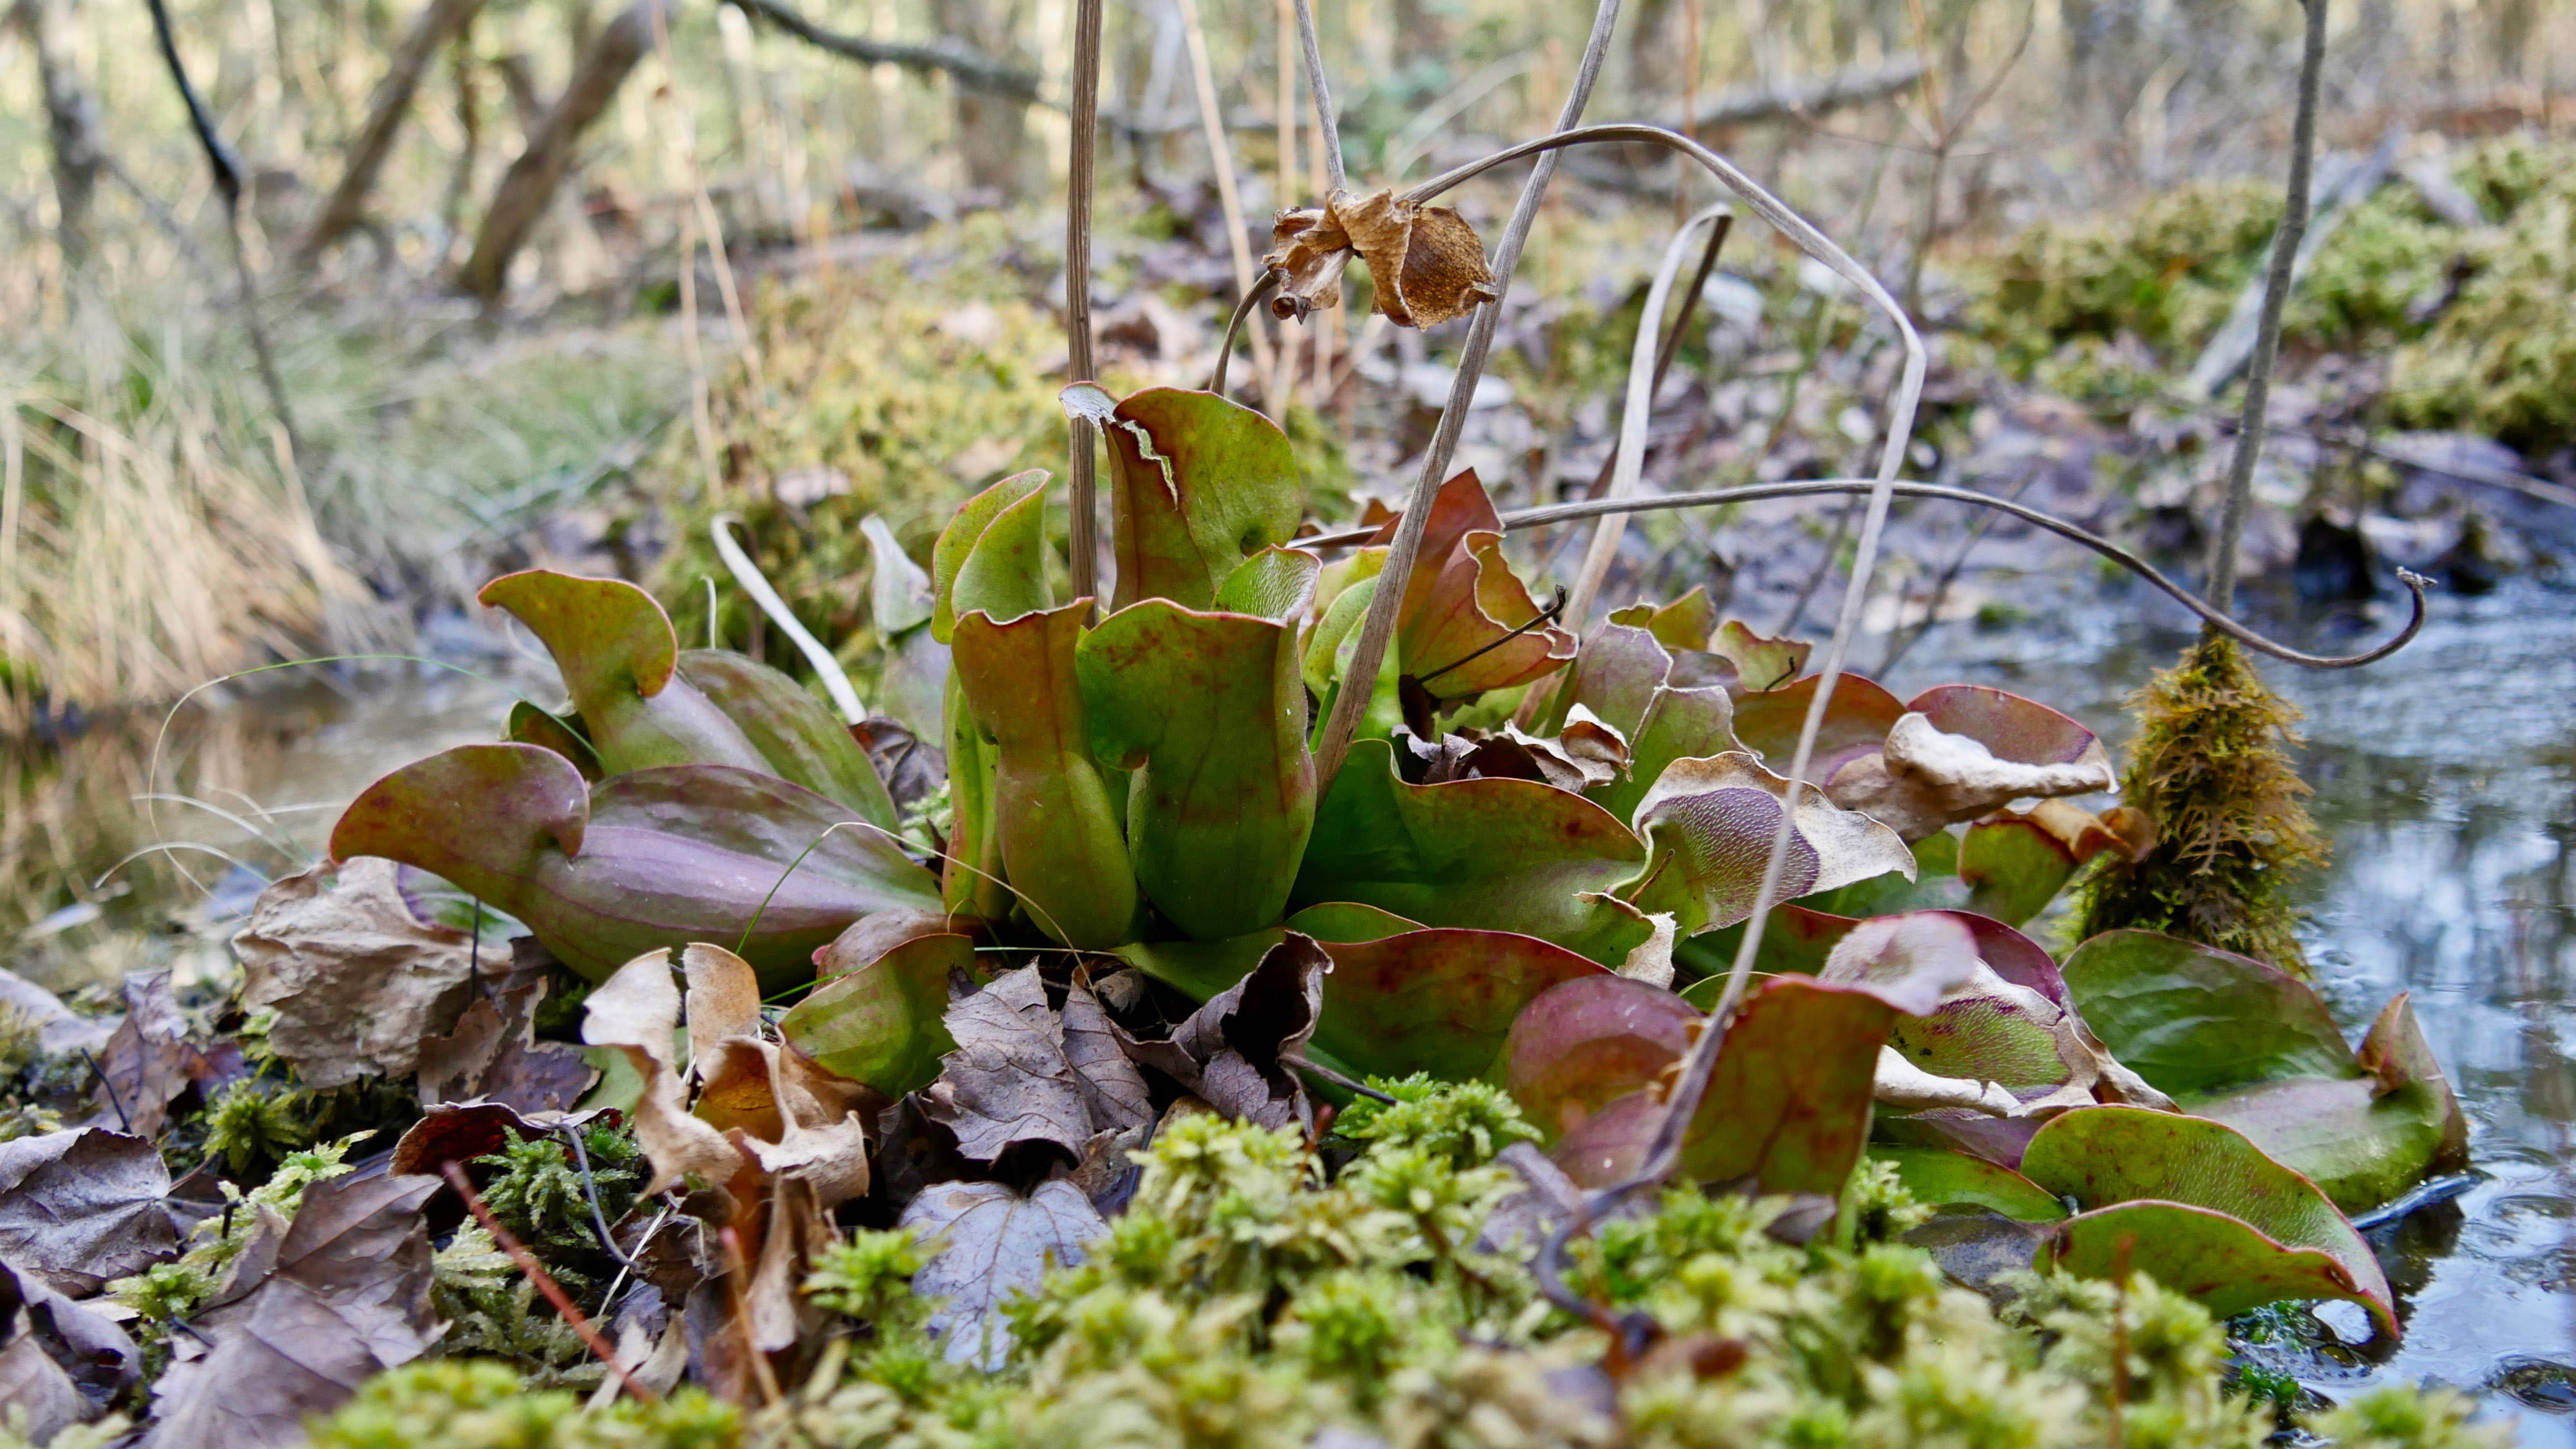 A cluster of pitcher plants. The fluted open throats of the tubular plant tempt passing insects.